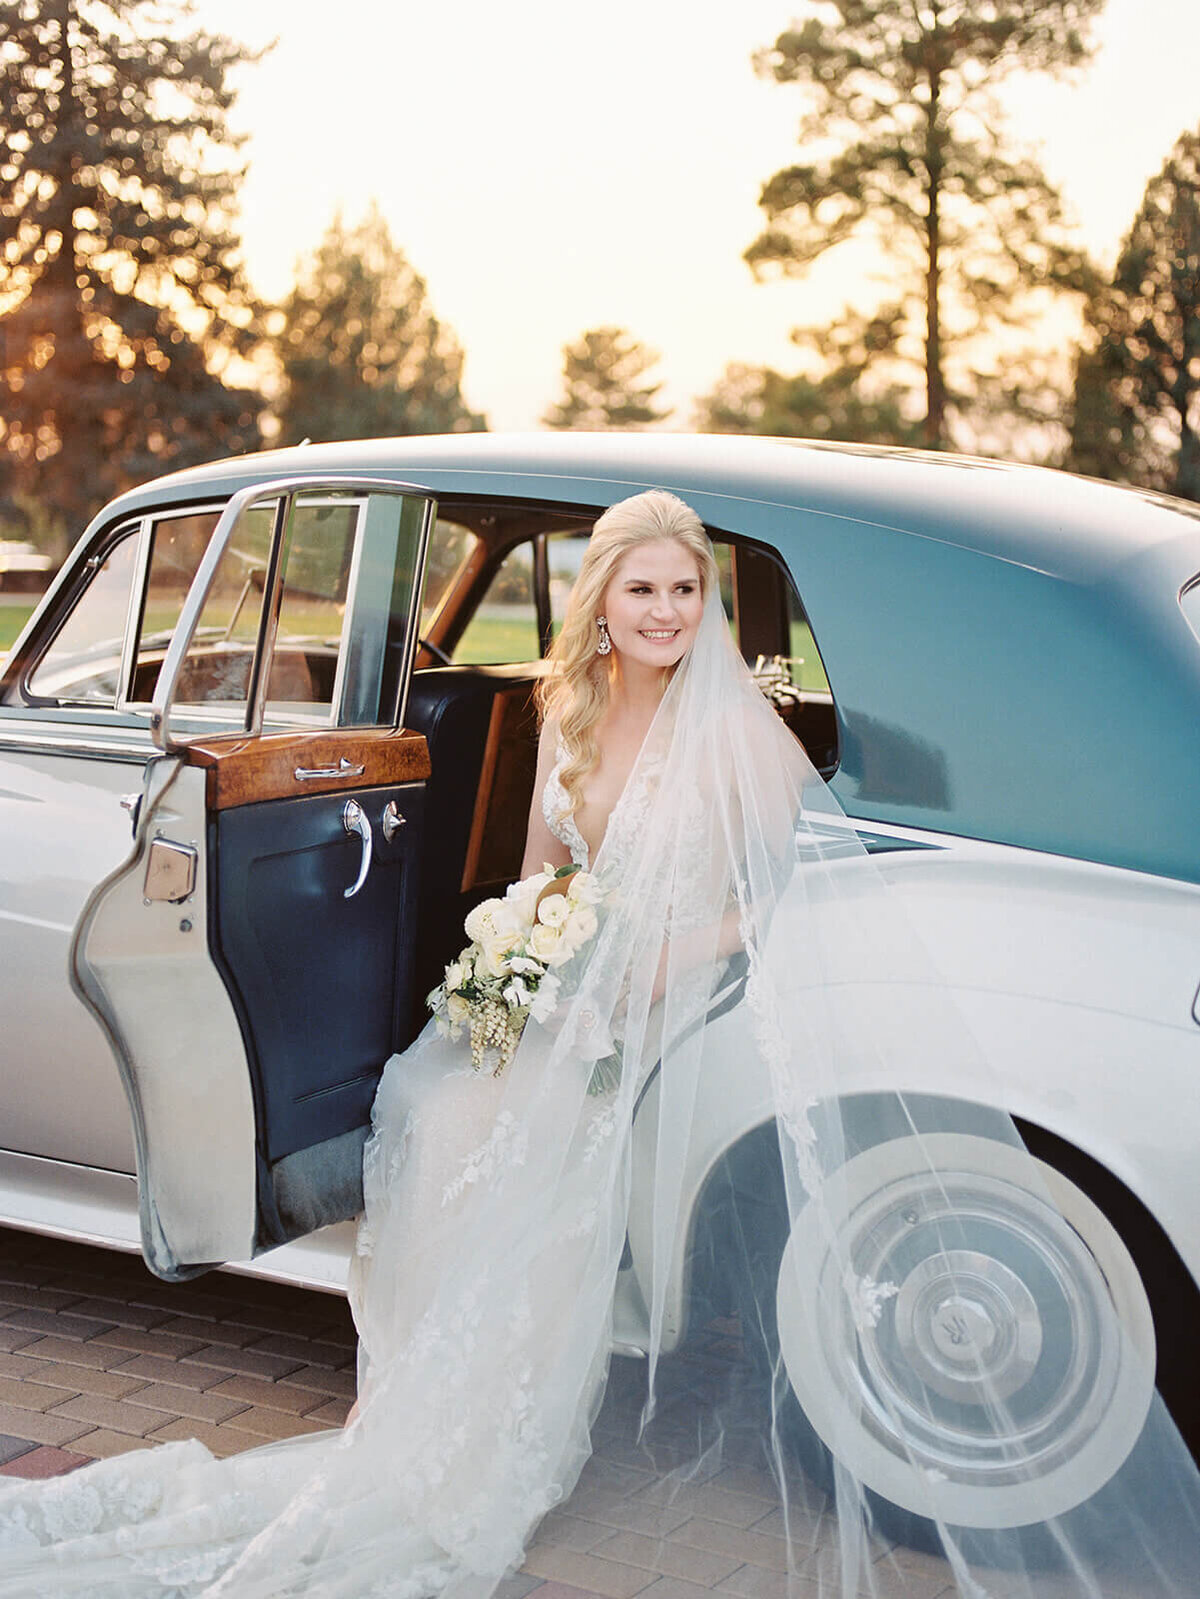 Bride stepping out of a classic car